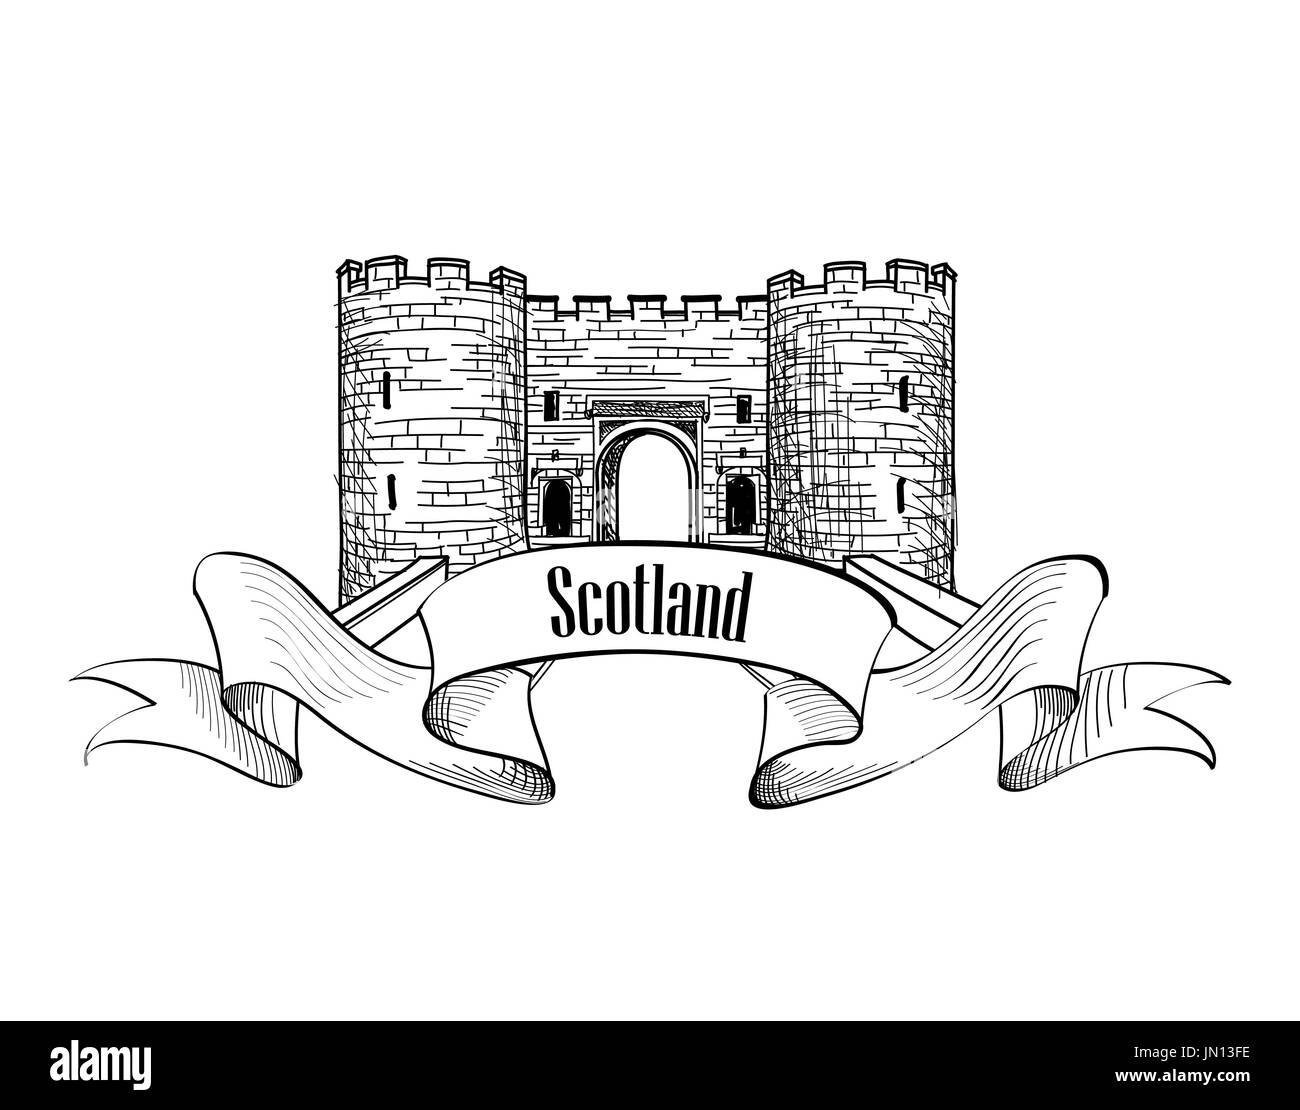 Scotland label with ribbon and copy space. Scotch famous Stirling castle sketch symbol, Stirlingshire, Scotland. Stock Photo